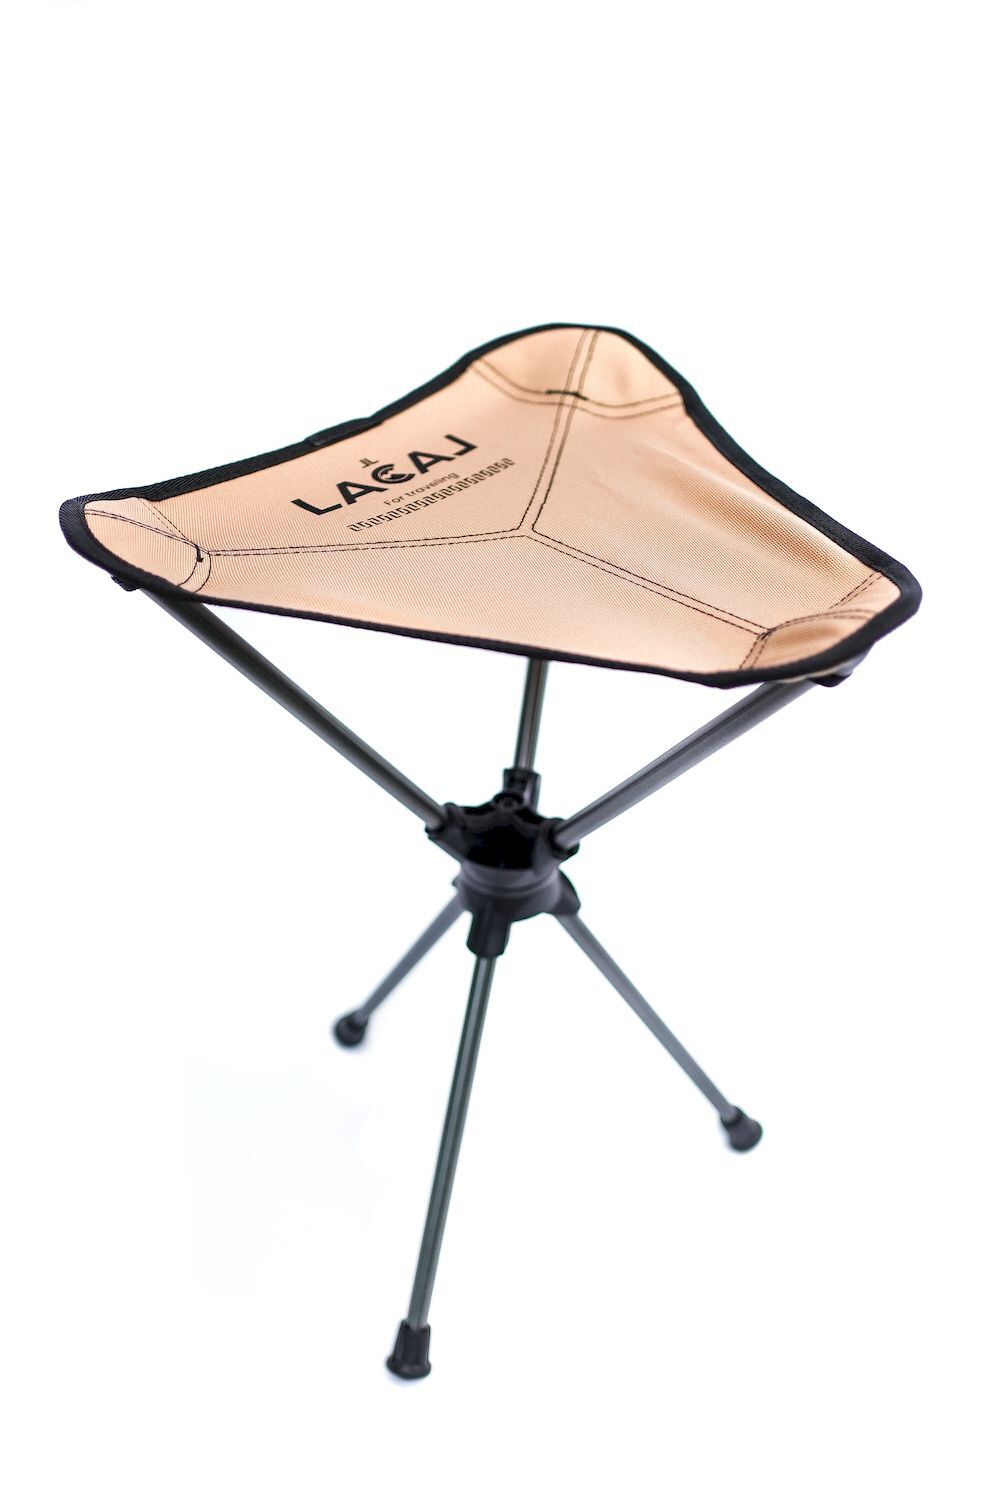 Lacal Nomad Stool - Silla de camping